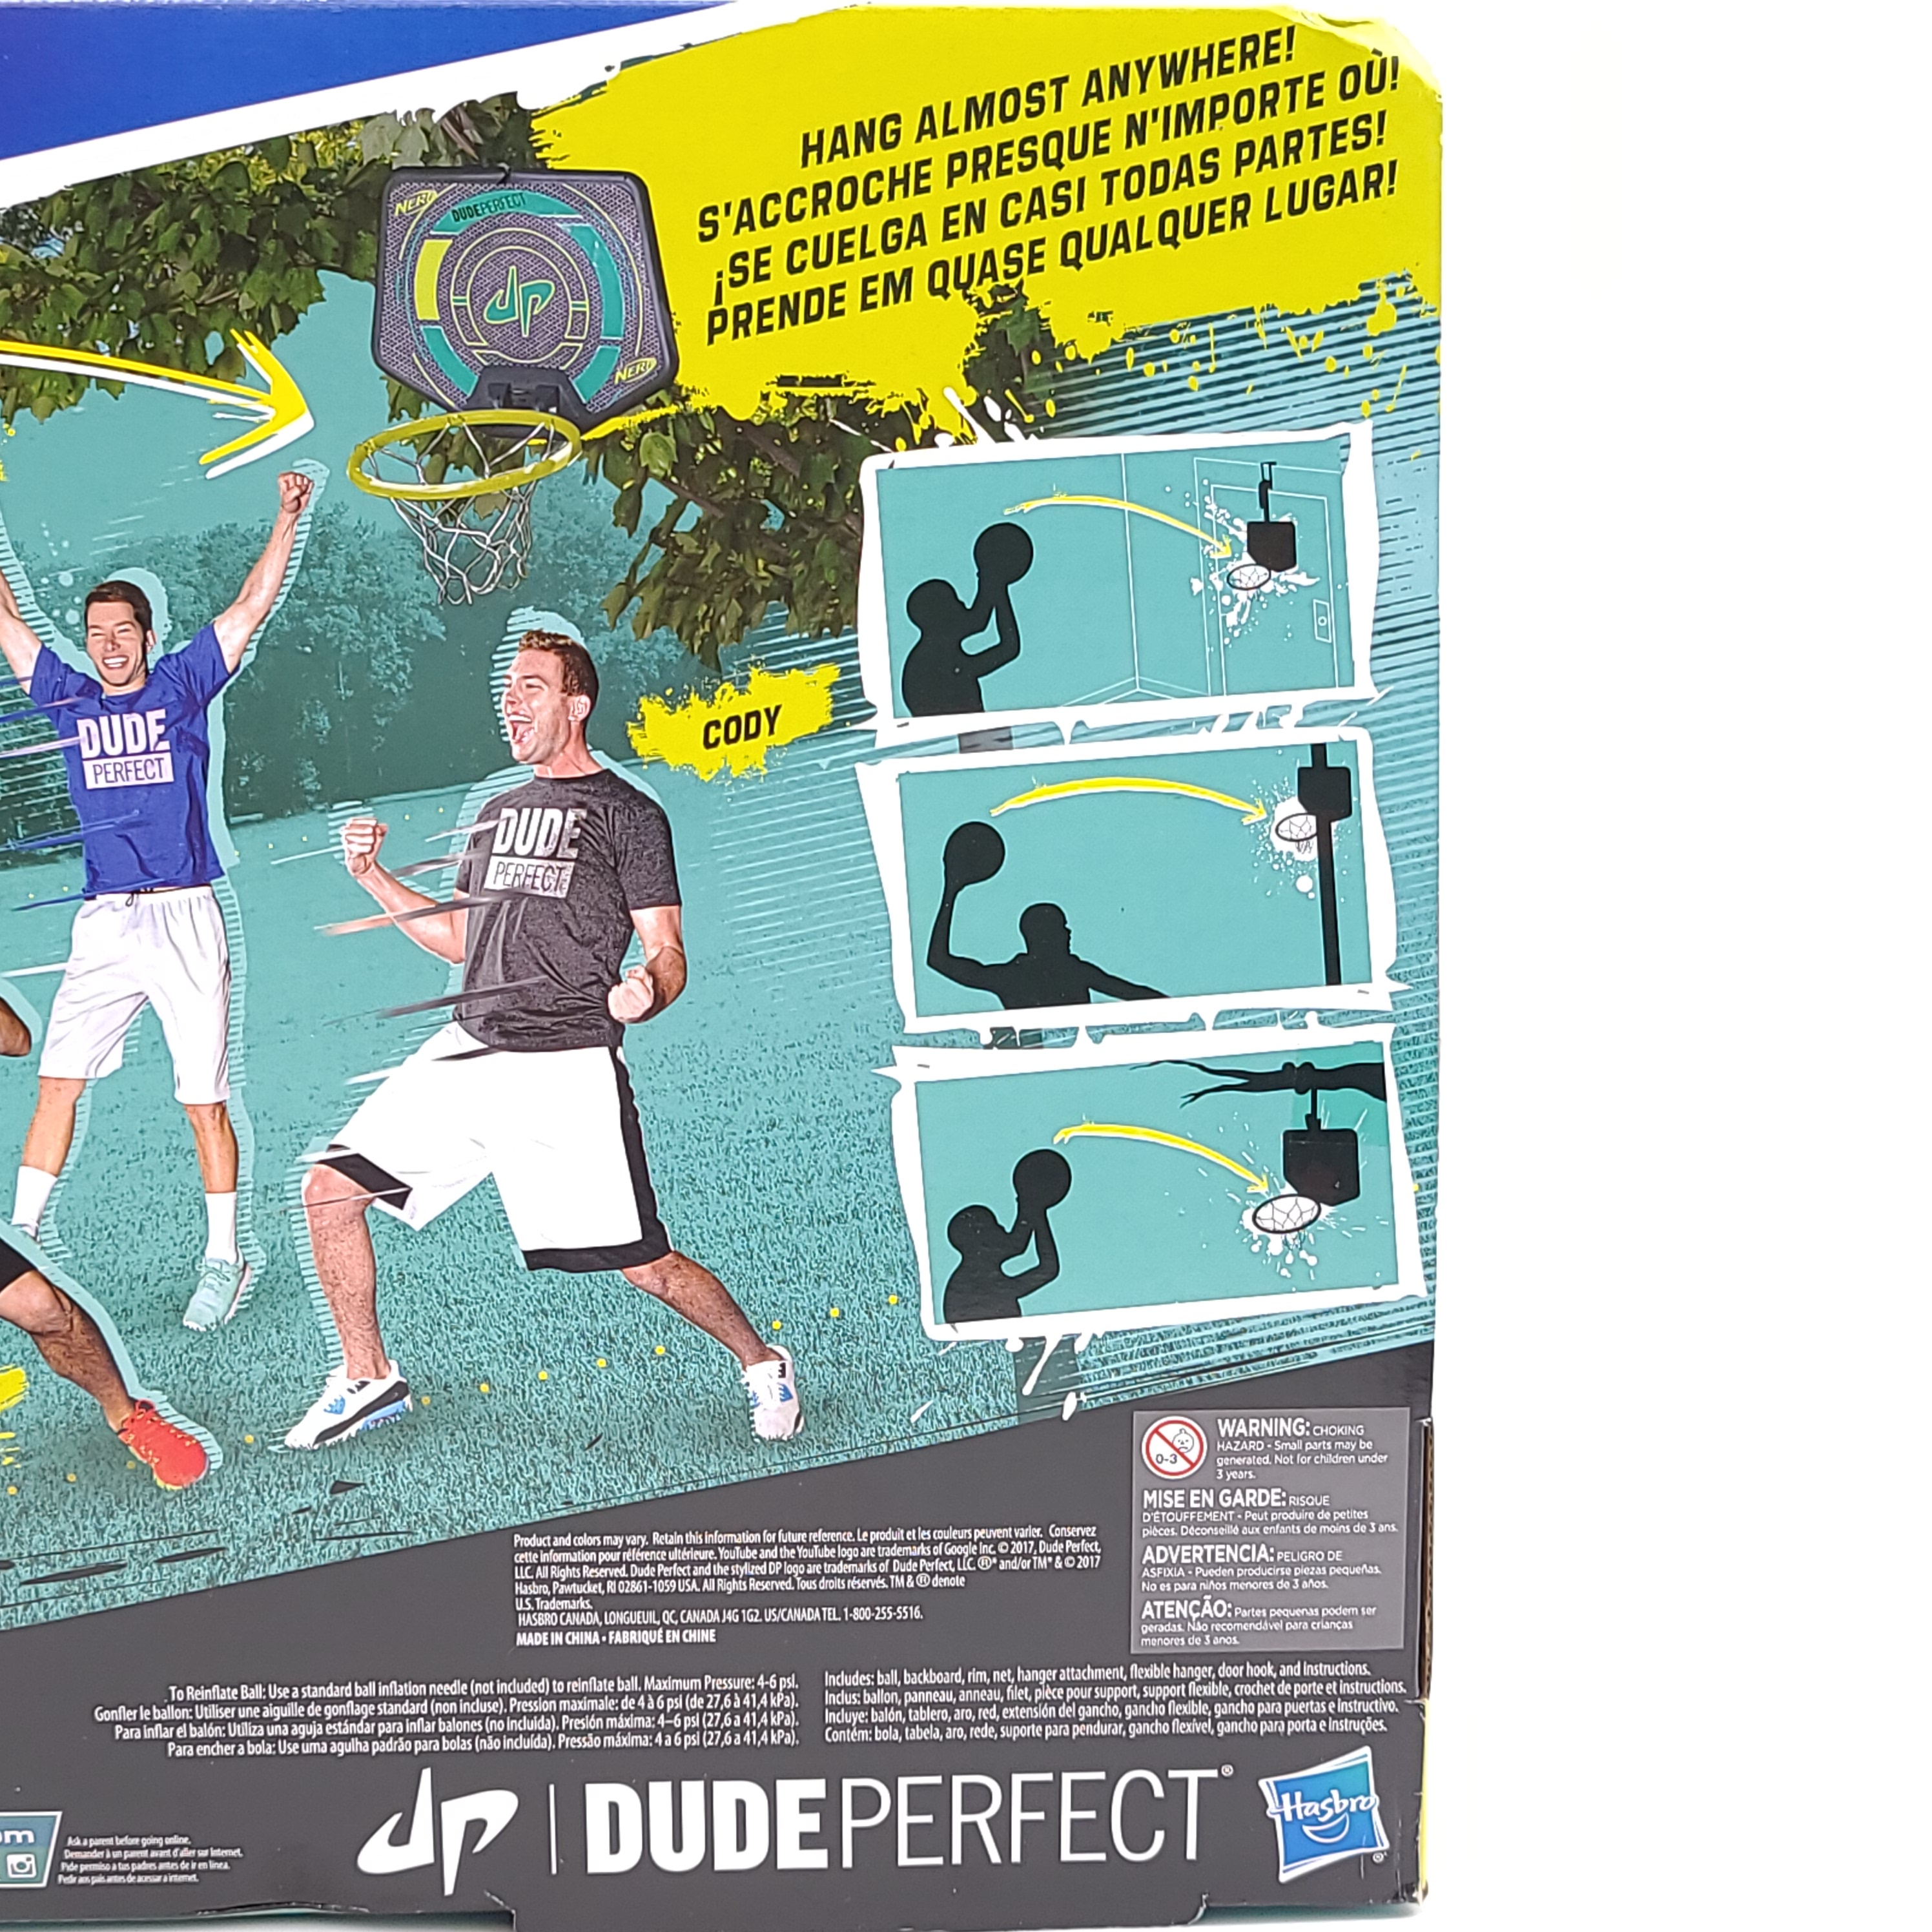 Nerf Dude Perfect Shot Hoops Interactive Game Set Kids Basketball Toy Hasbro NEW 